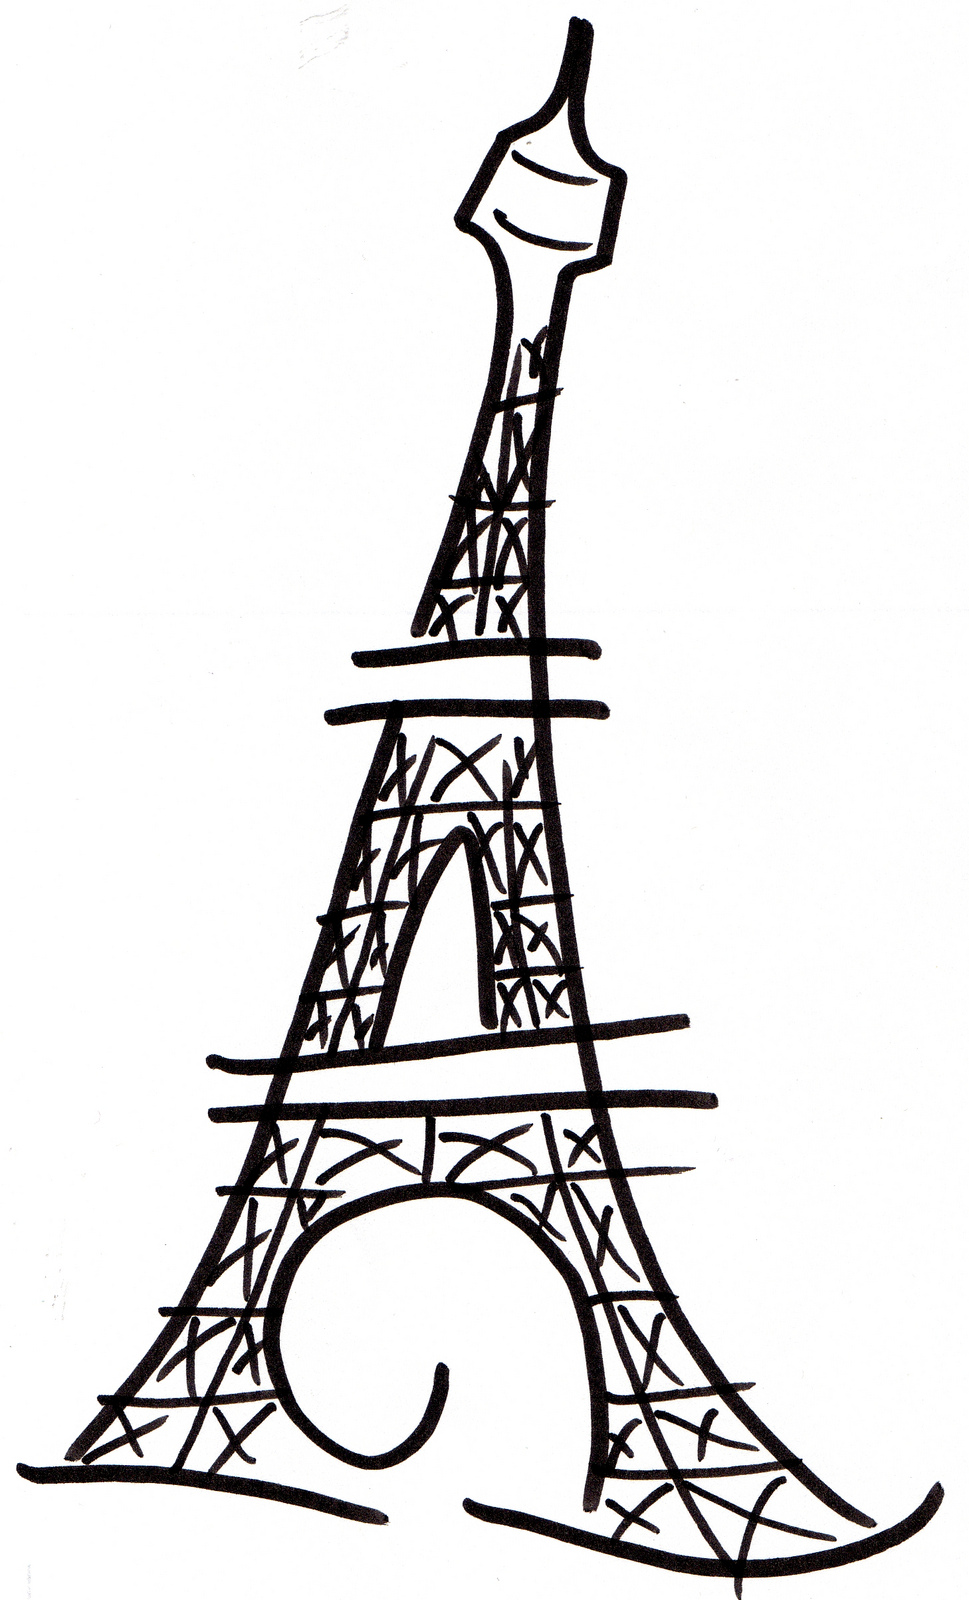 Drawings Of The Eiffel Tower - ClipArt Best